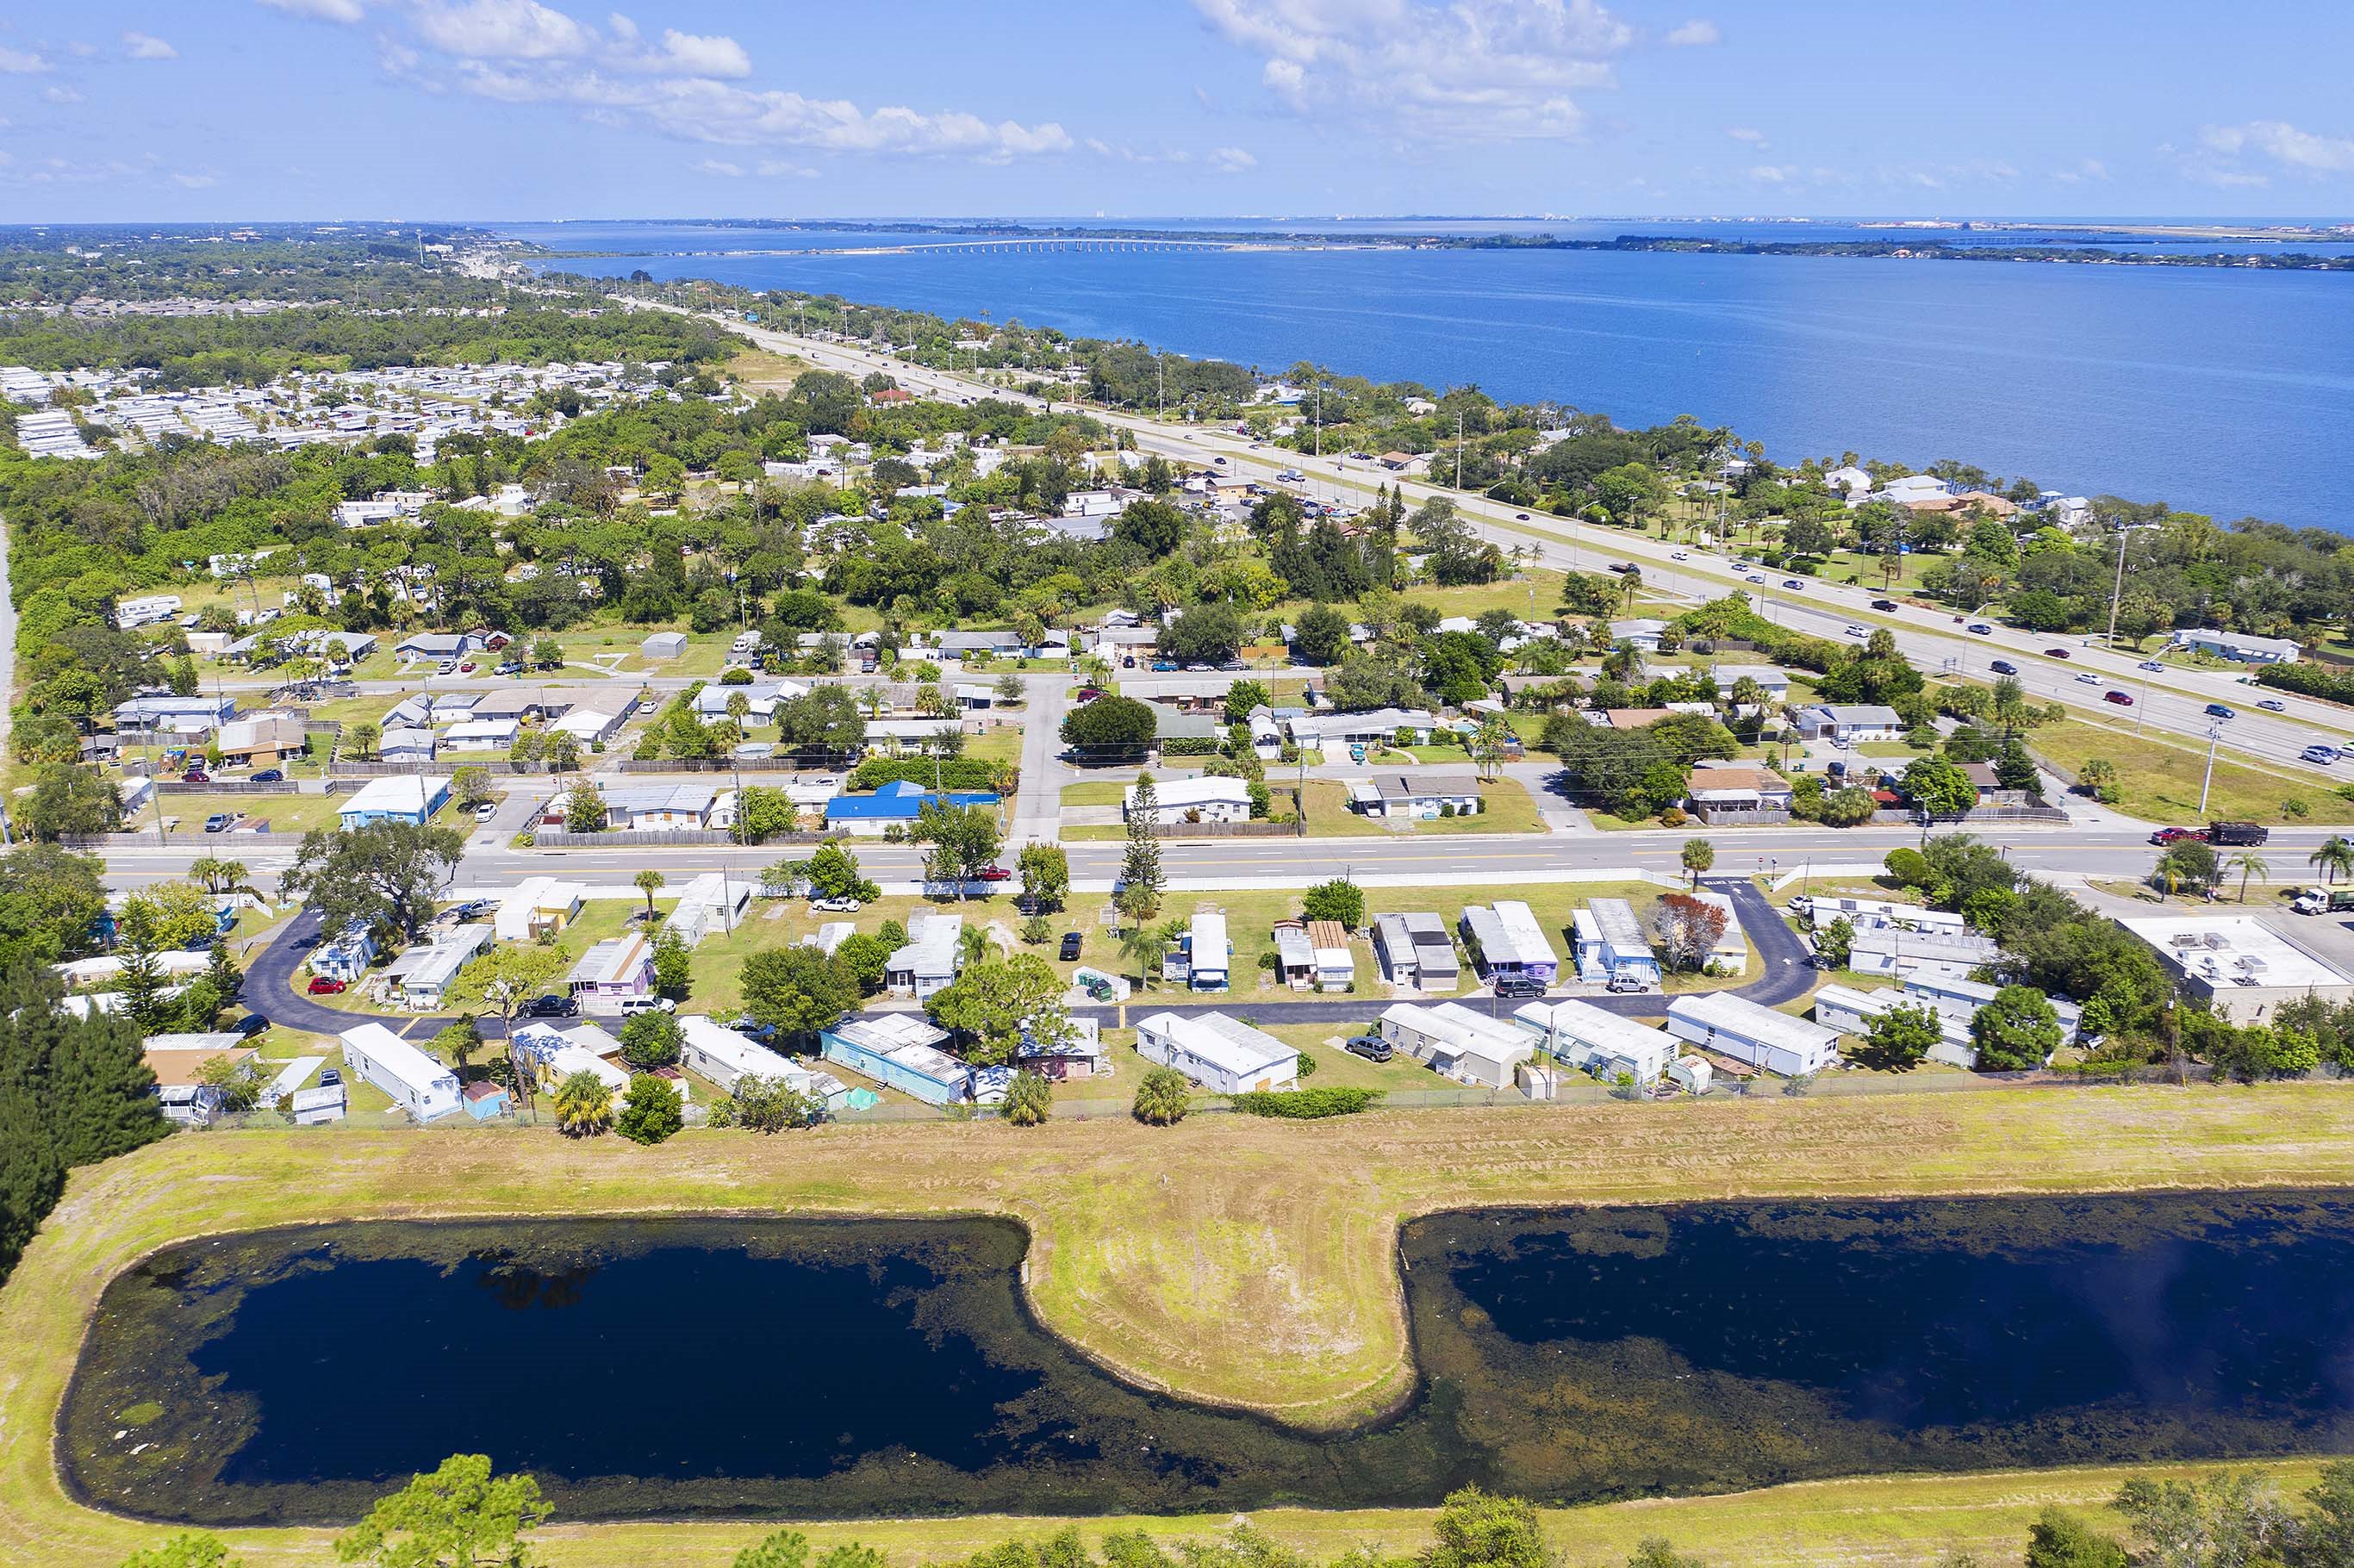 Photos and Video of Broadview Mobile Home Park in Melbourne, FL